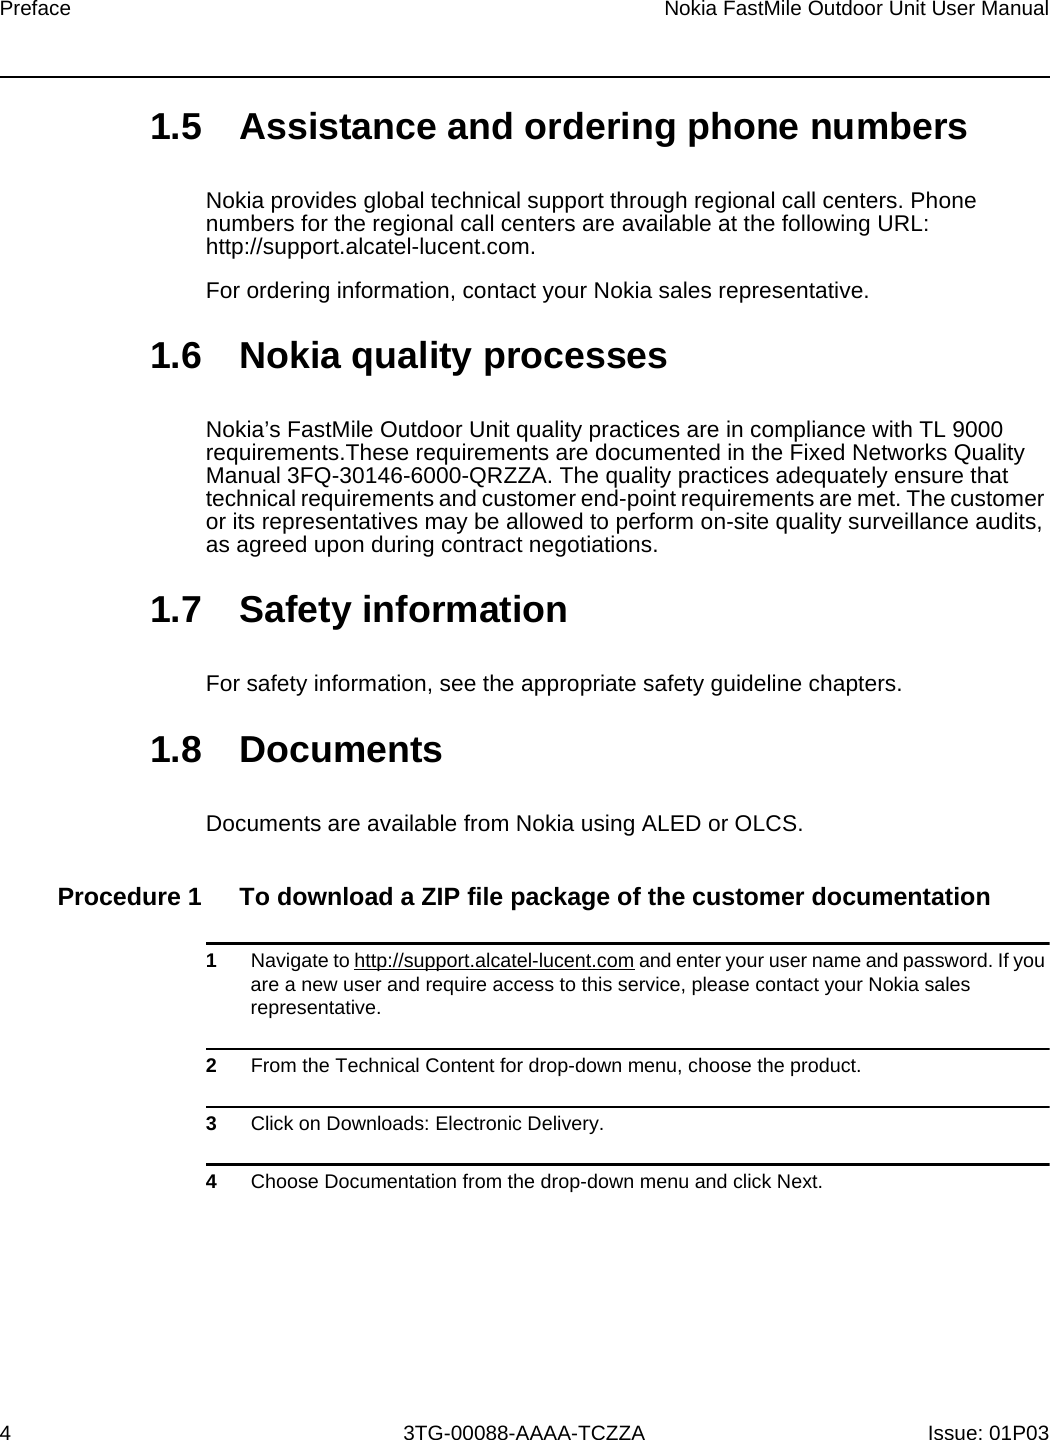 Page 4 of Nokia Bell 34003800FM20 FastMile Compact User Manual Nokia FastMile Outdoor Unit